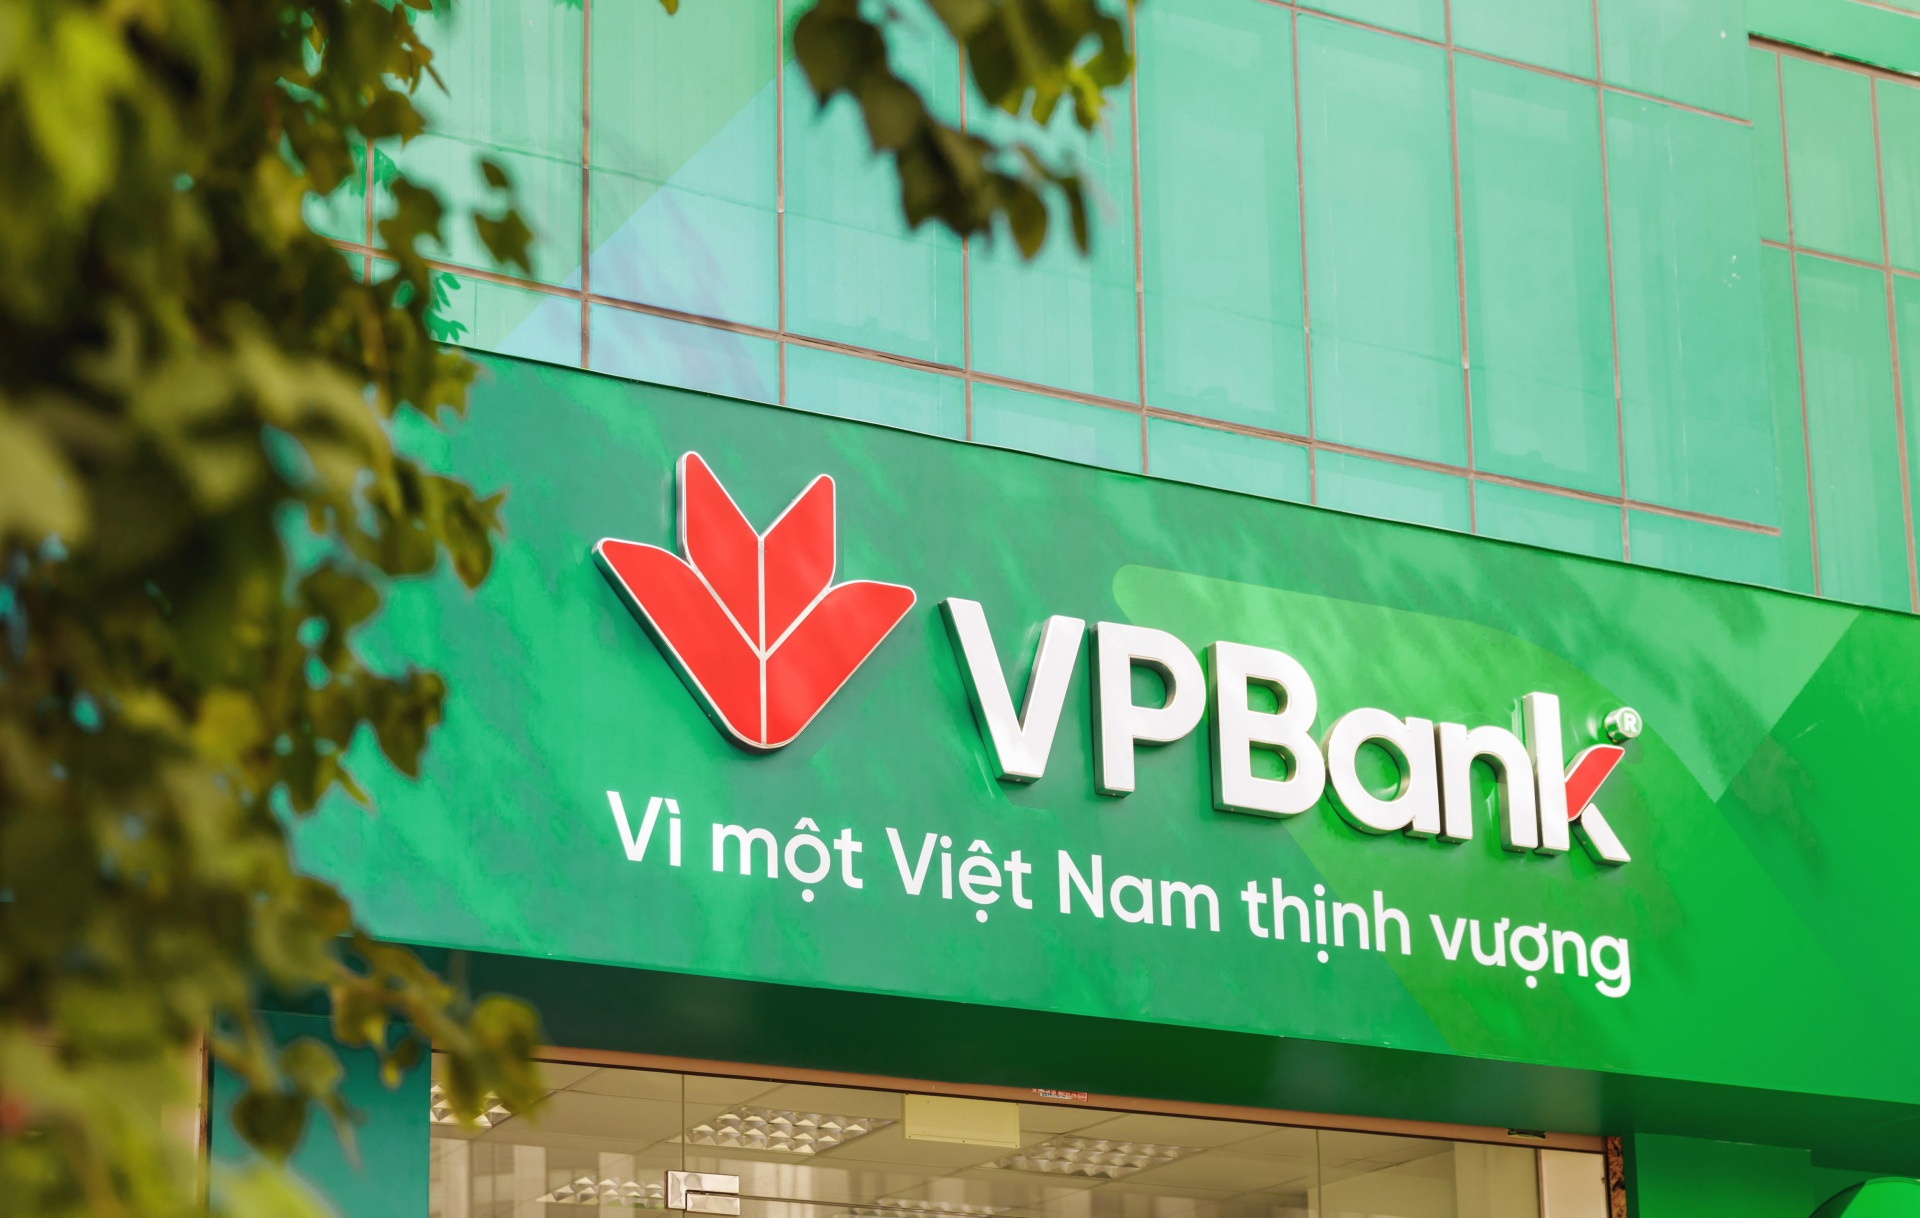 vpbank ceo addresses challenges and strategies for vietnams real estate sector